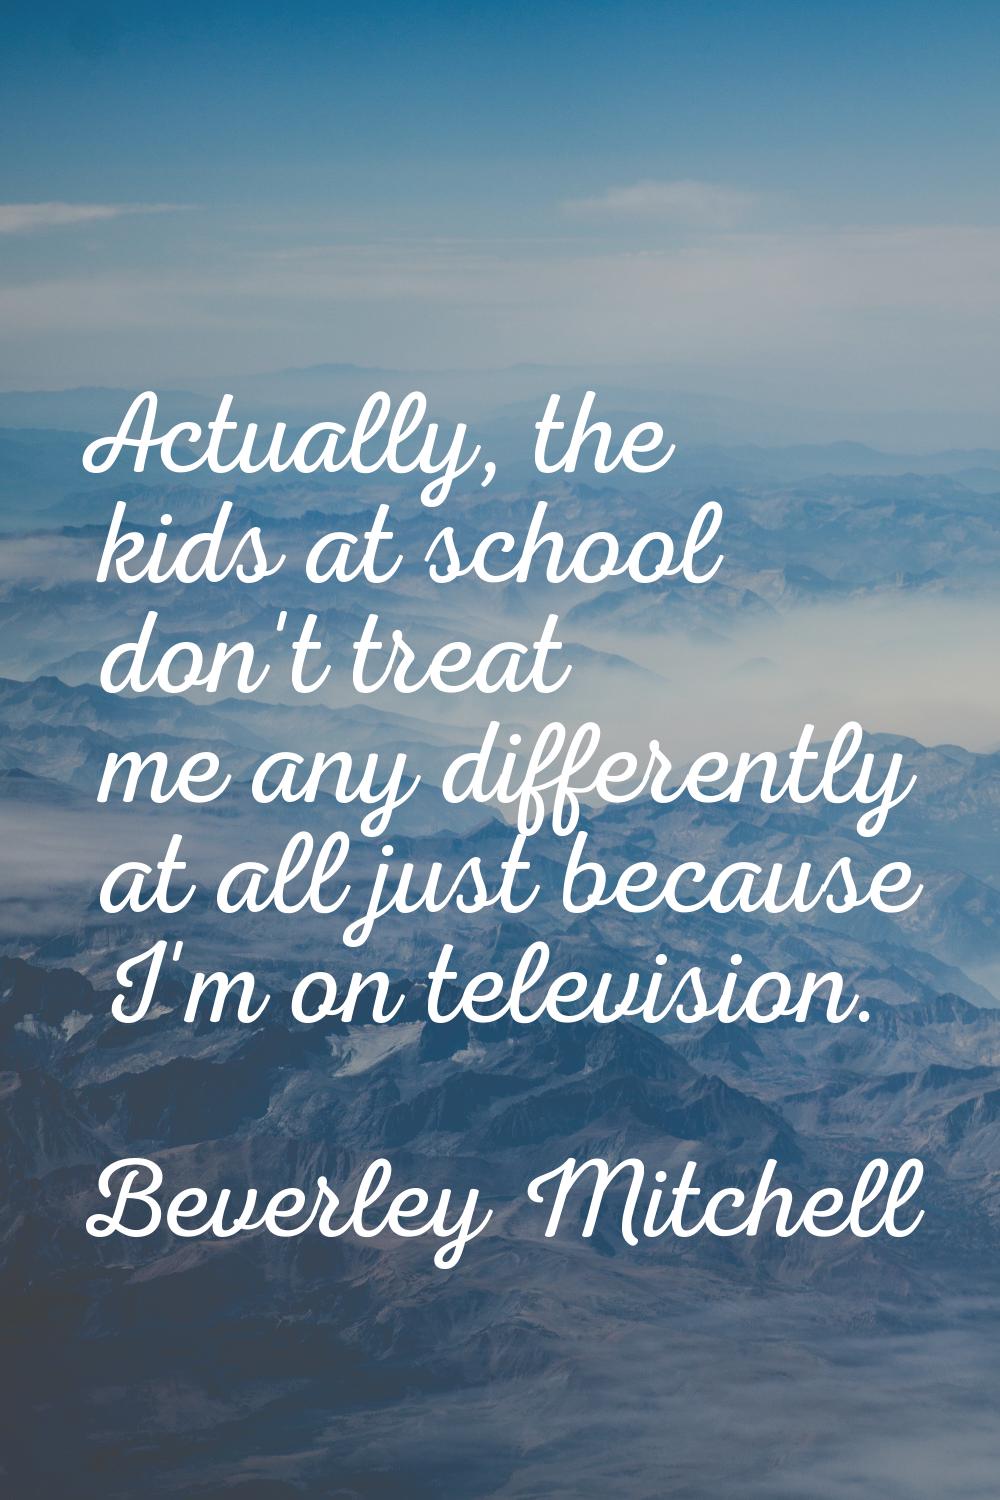 Actually, the kids at school don't treat me any differently at all just because I'm on television.